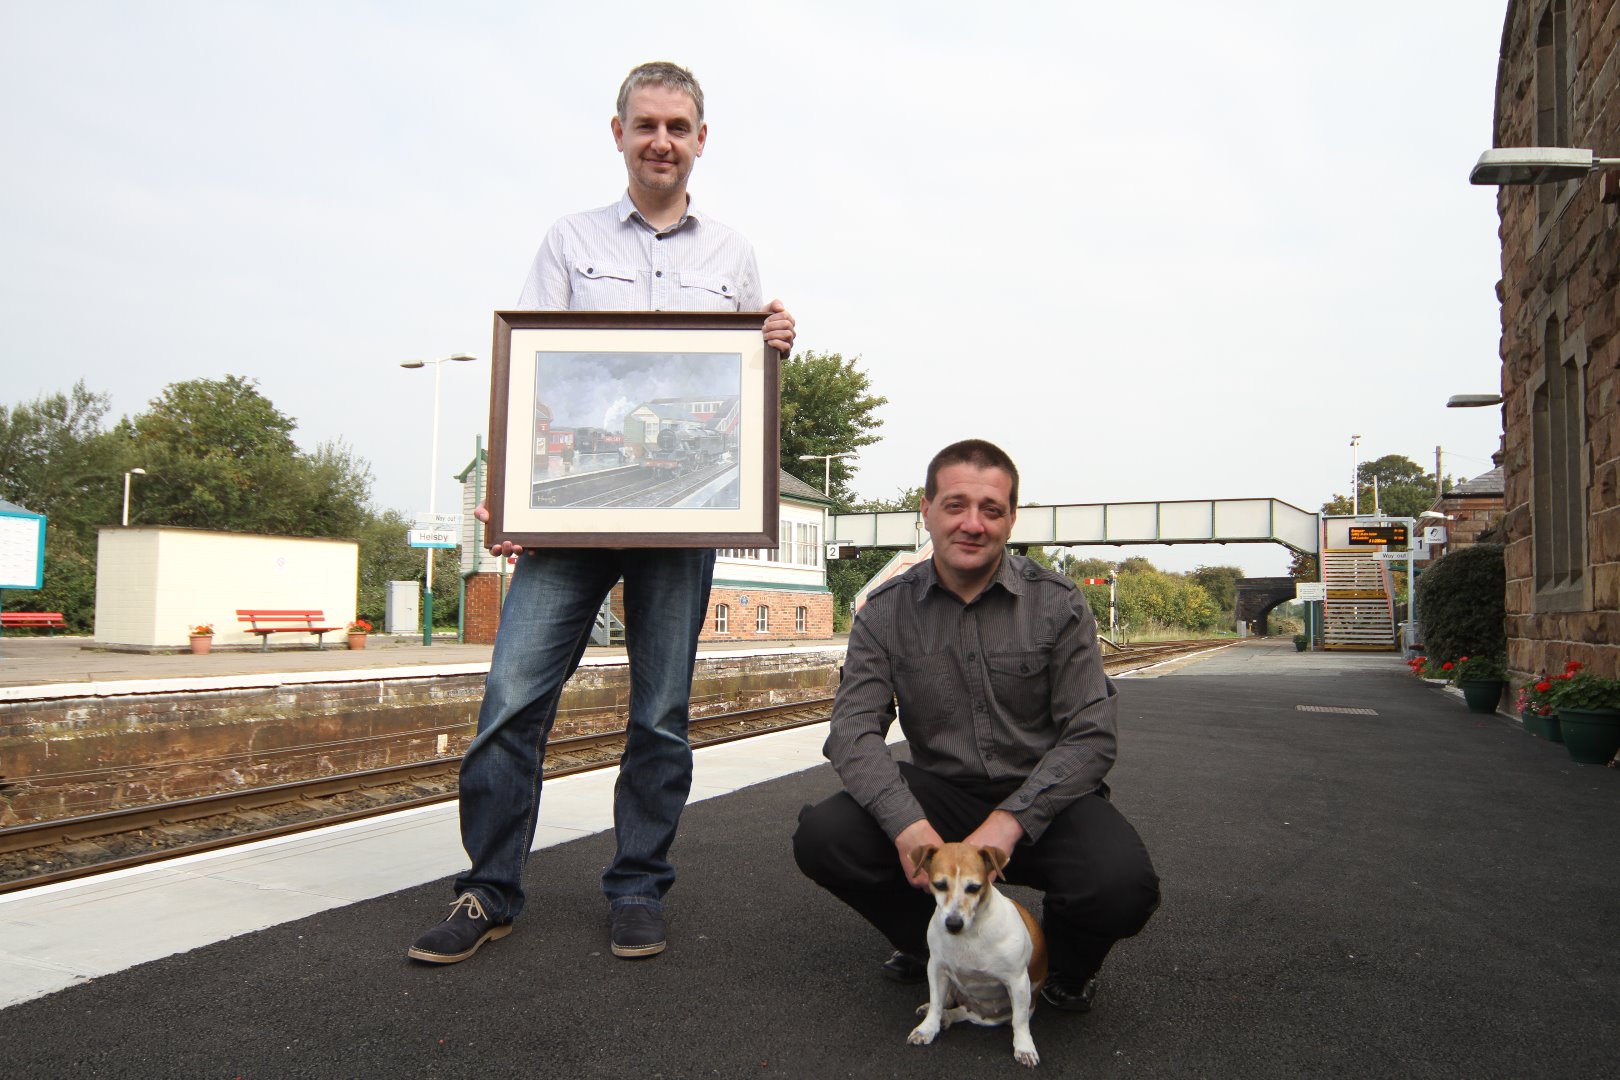 Nick Harling, Ian Whitley  and Pip at Helsby Station